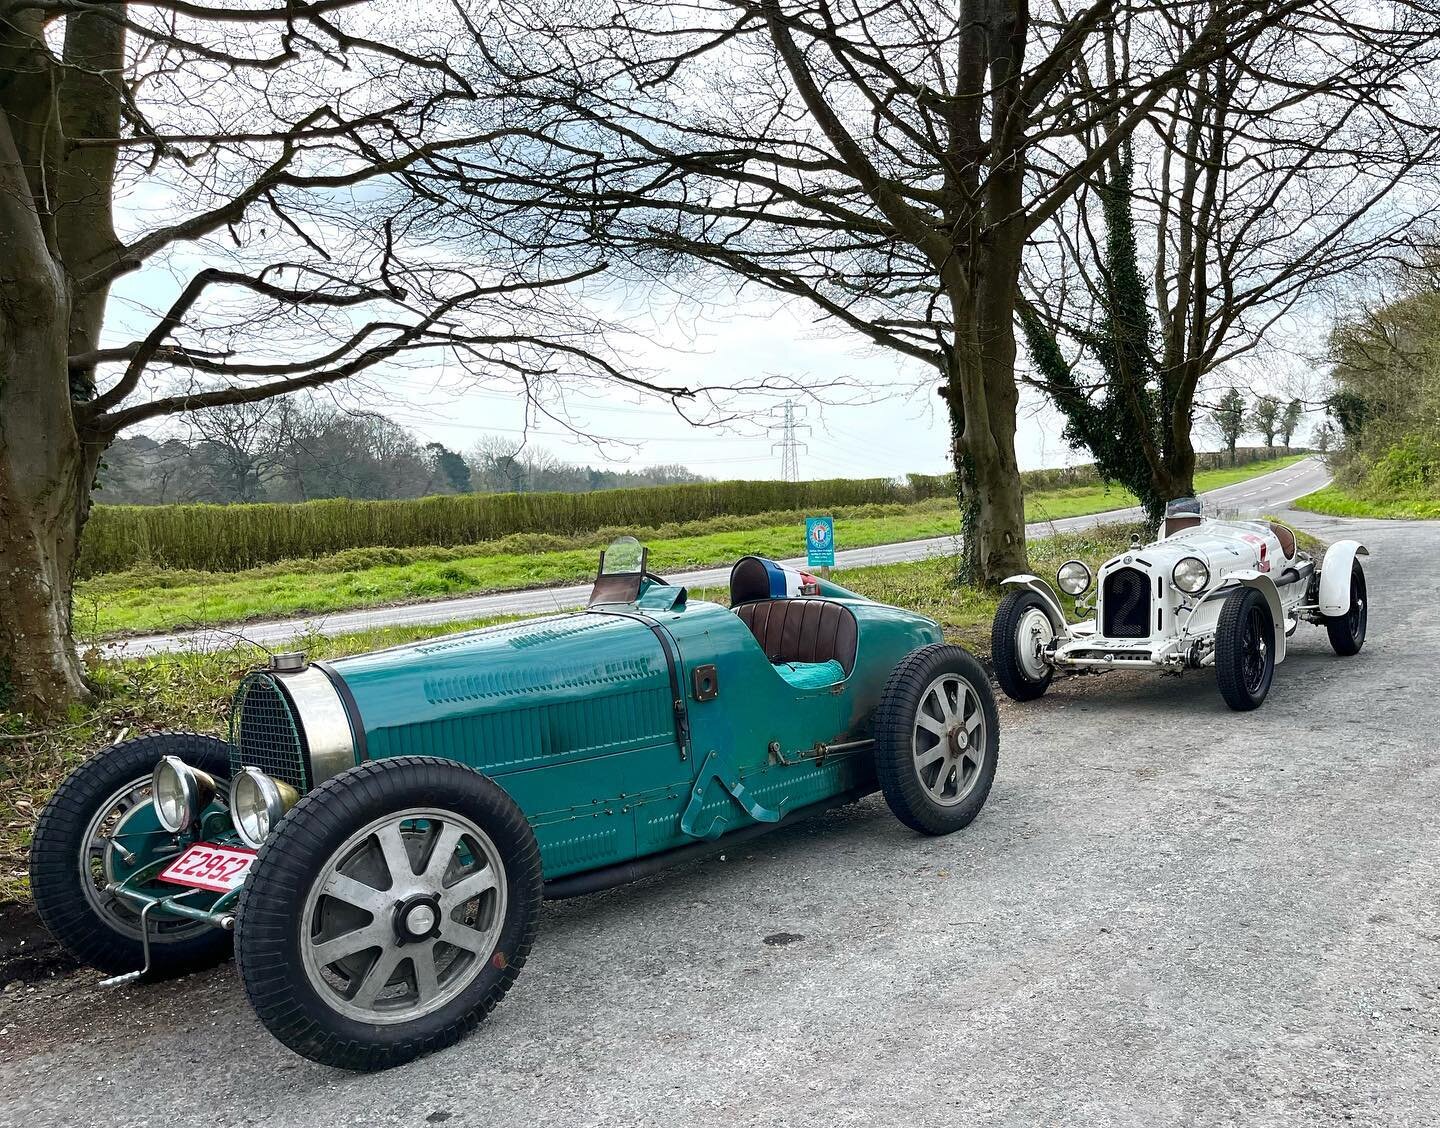 The drive home from a motor race @goodwoodmotorcircuit with Alfa Romeo 8c supported by the workhorse Bugatti type 35b. Two great Grand Prix cars and #notrailers . #bugattitype35 #alfaromeo8c